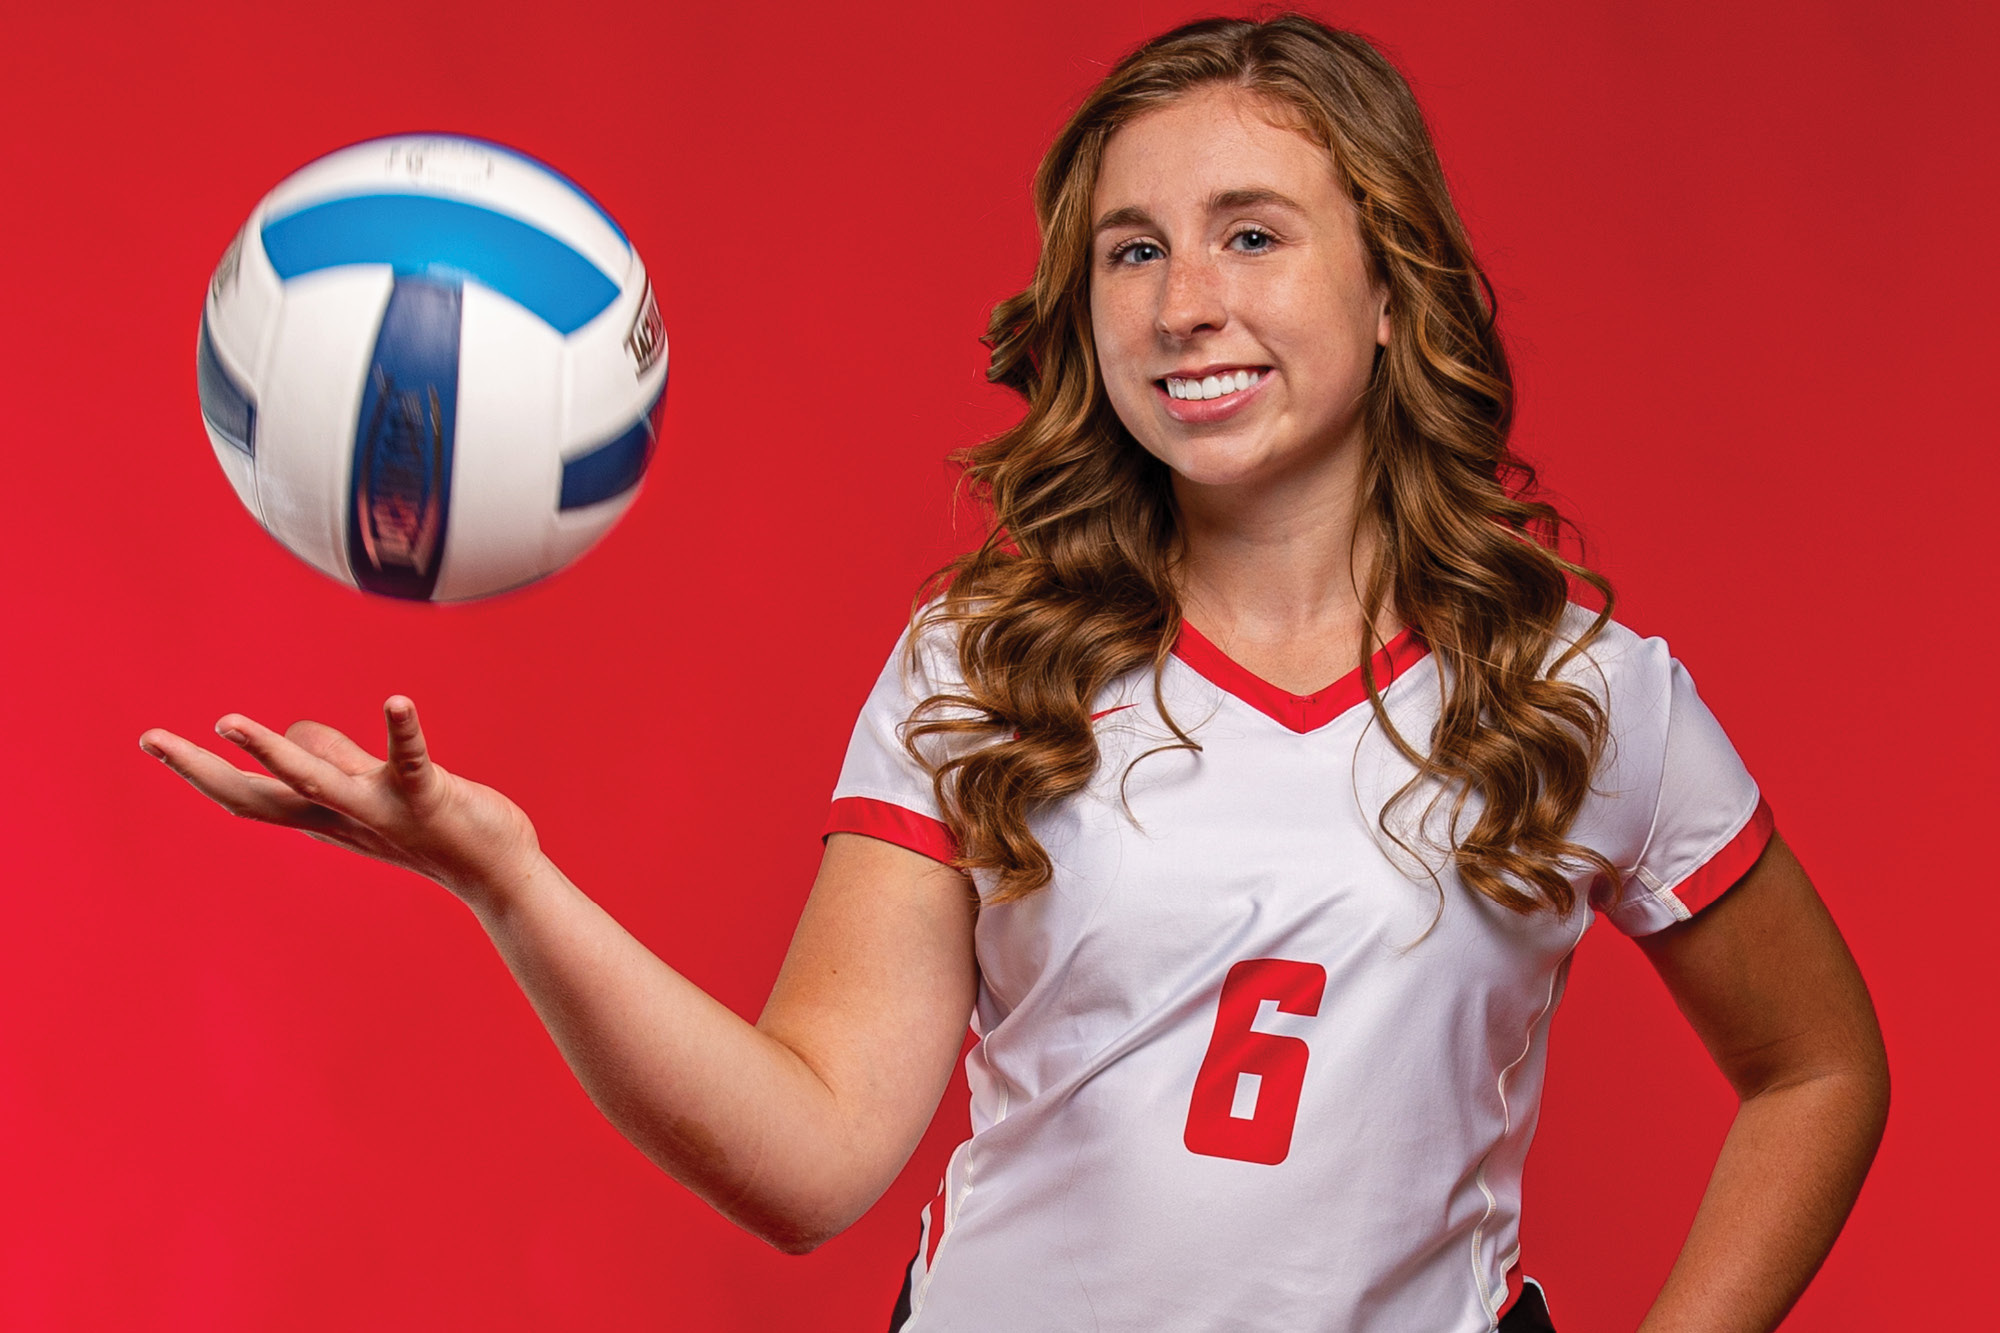 Photo of Casper College volleyball player Kylie Watson tossing up a volleyball